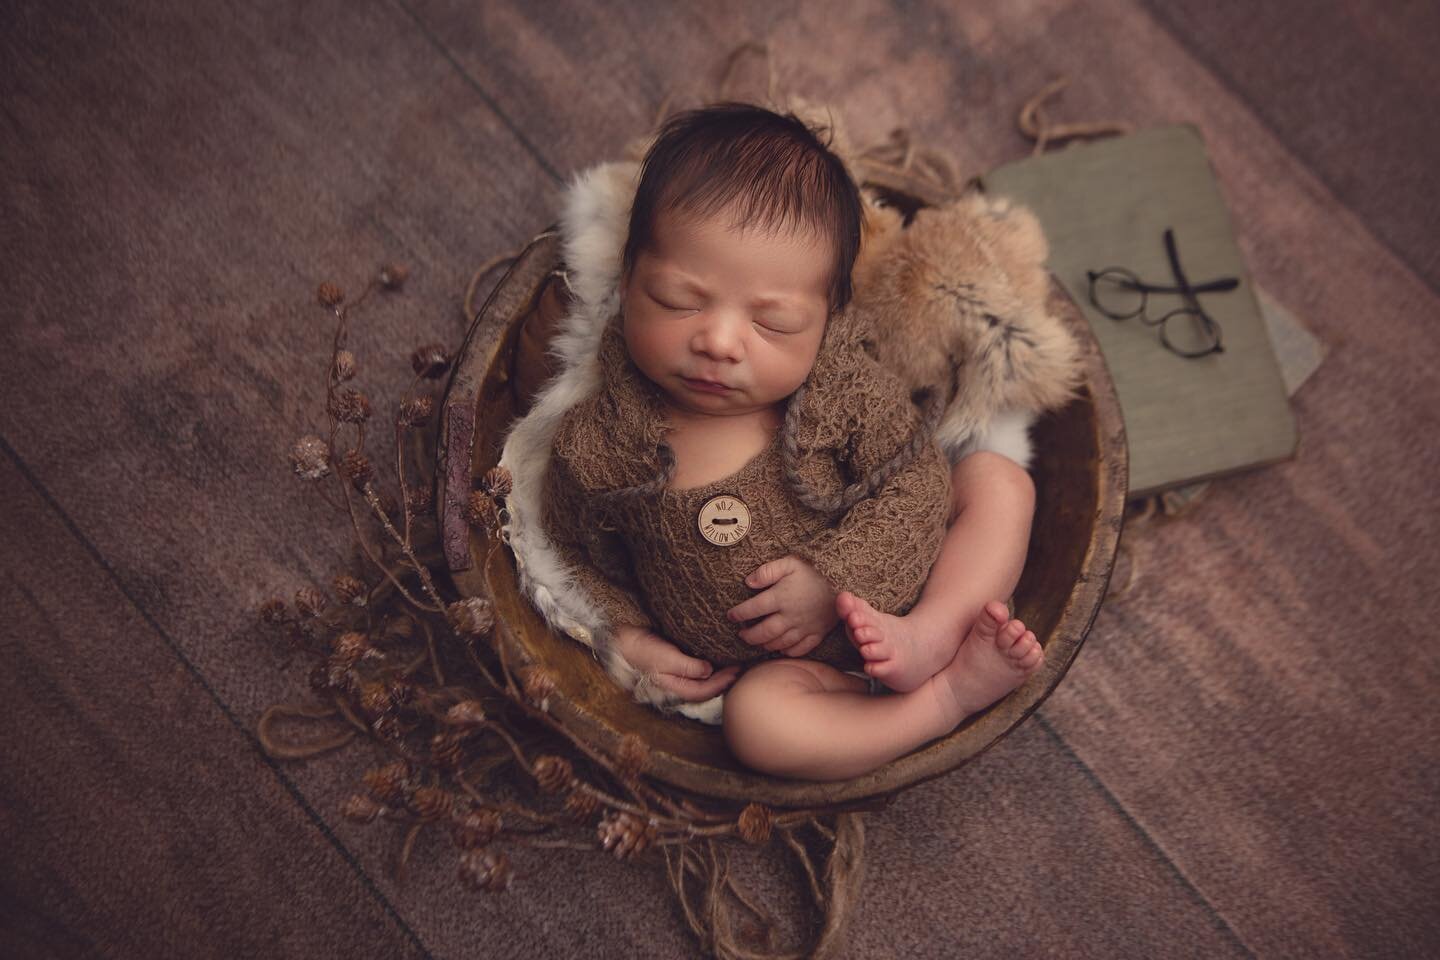 To book your sweet newborn session, visit the link in my bio. Bonnet by @littleblessingphotoprops